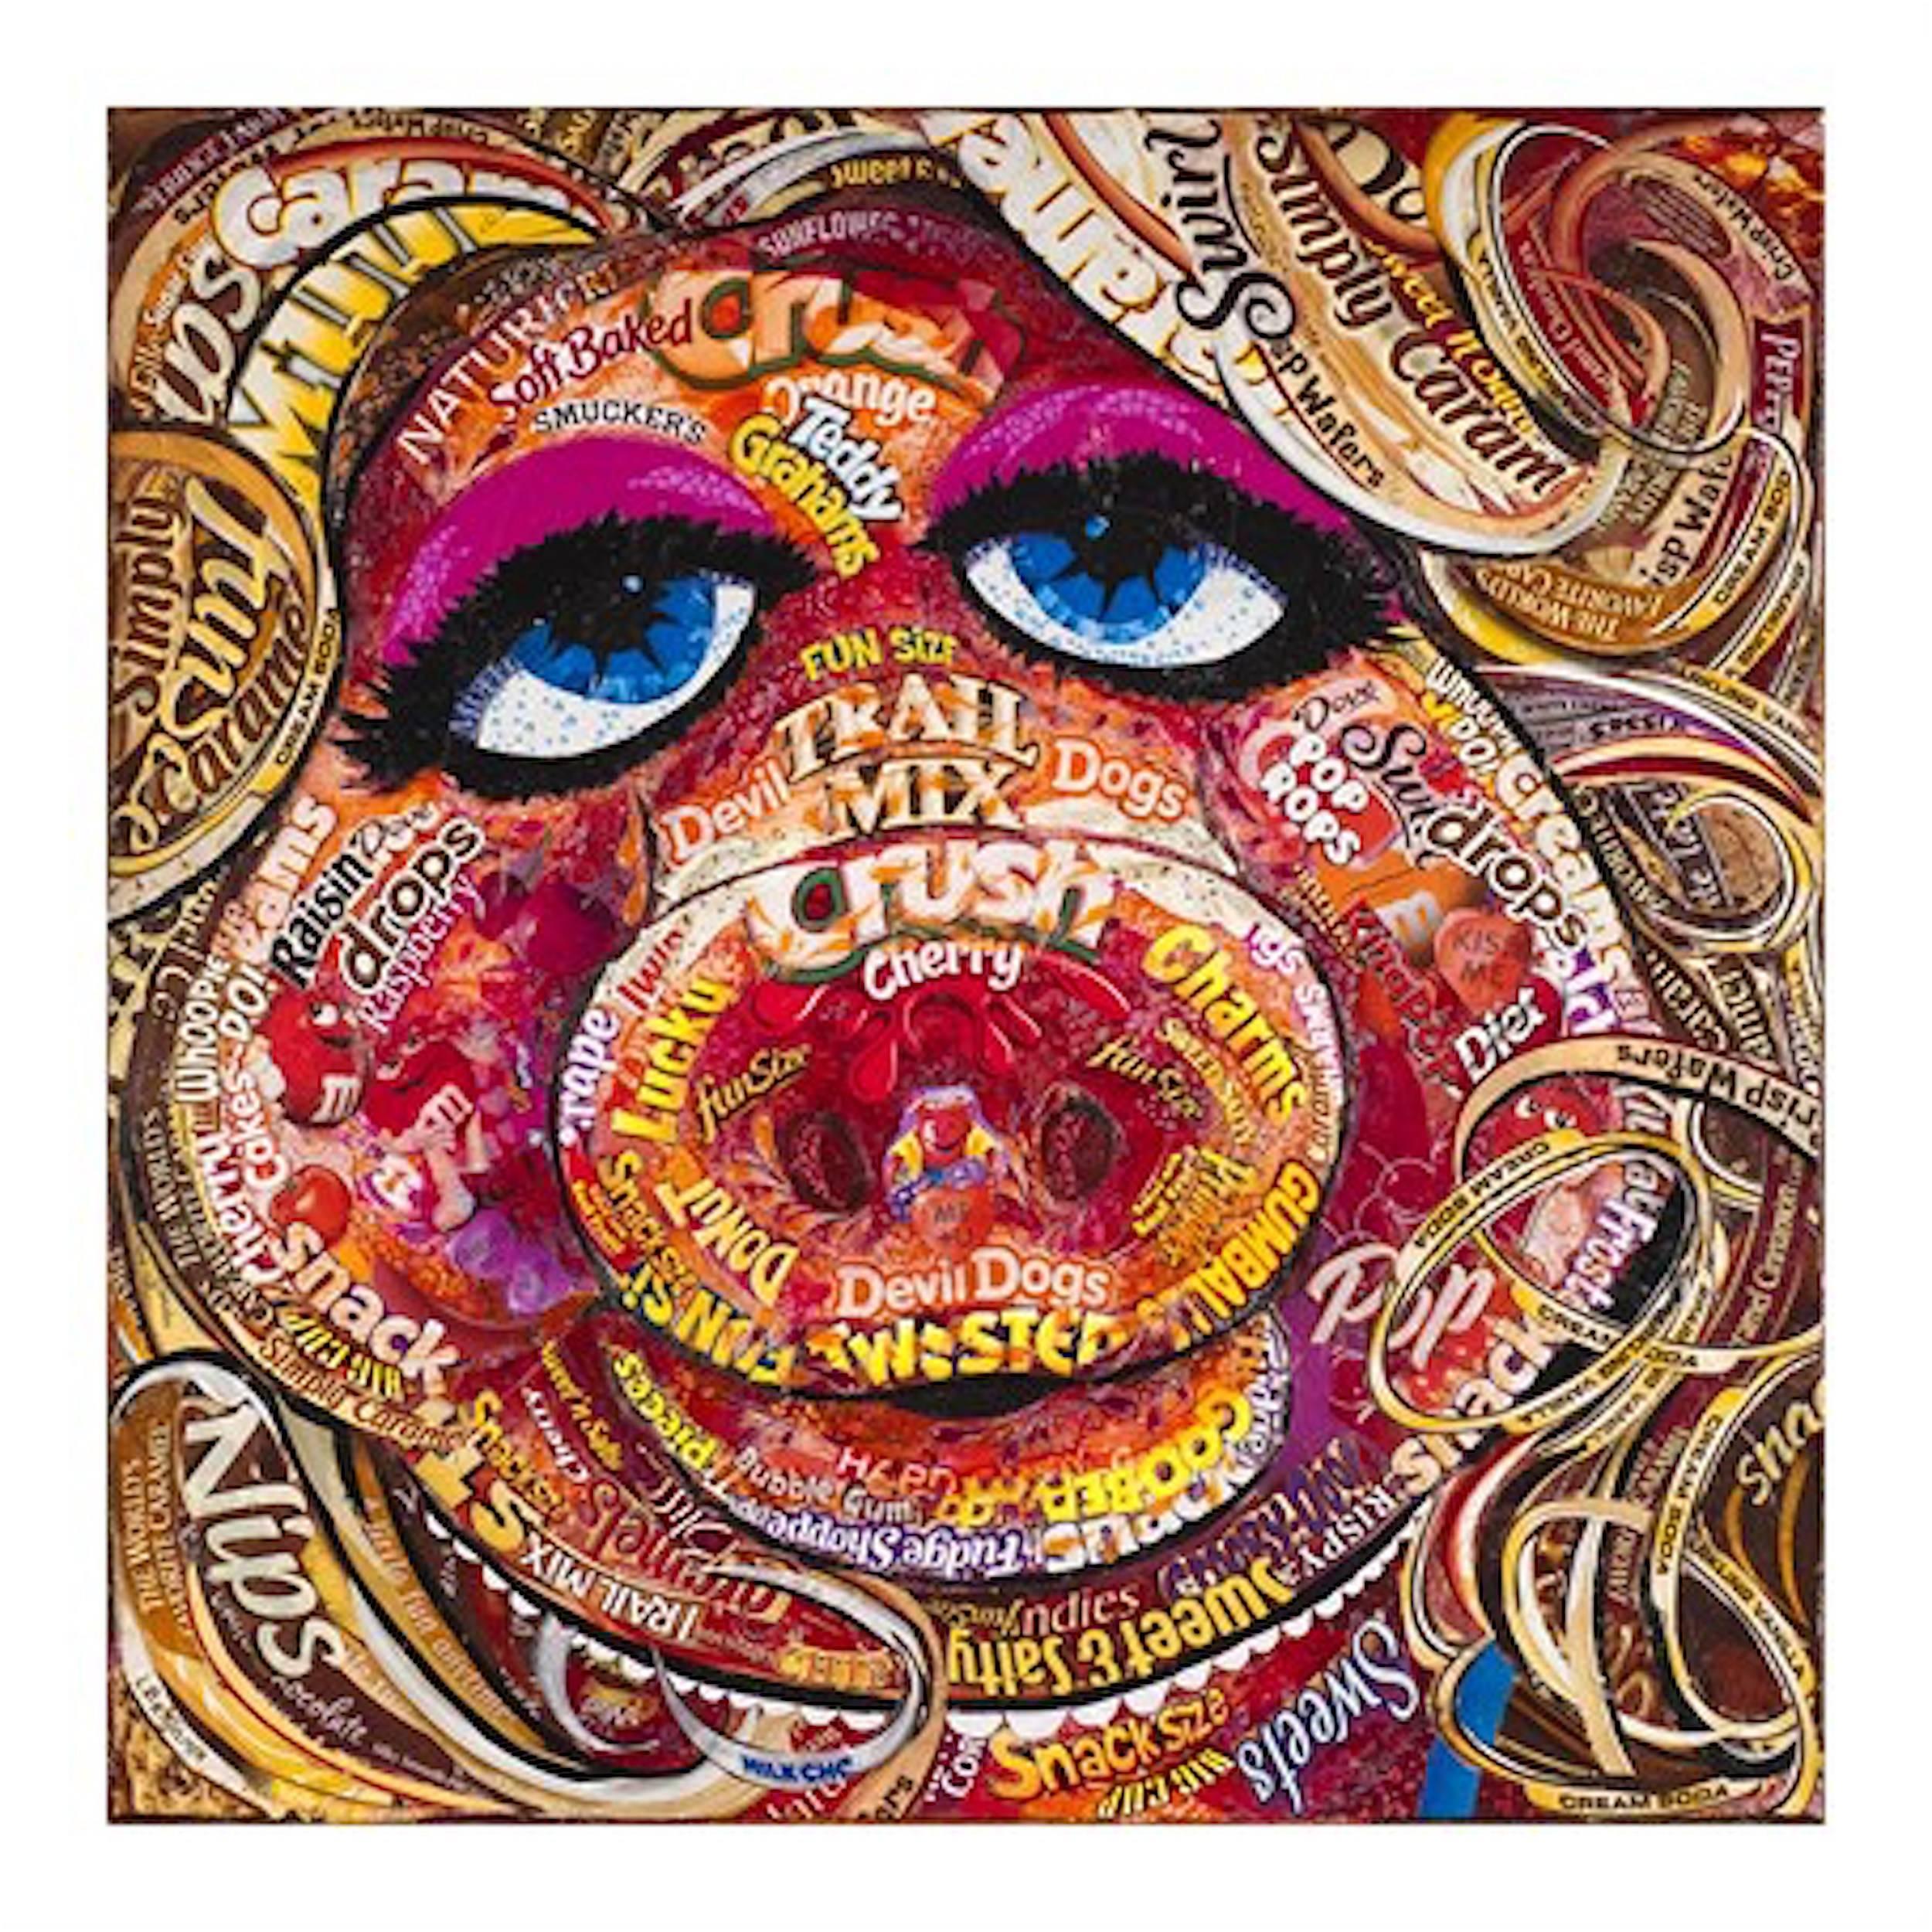 Miss Piggy - Original - Part of Candy Wrapper Collage Series - Mixed Media Art by Laura Benjamin